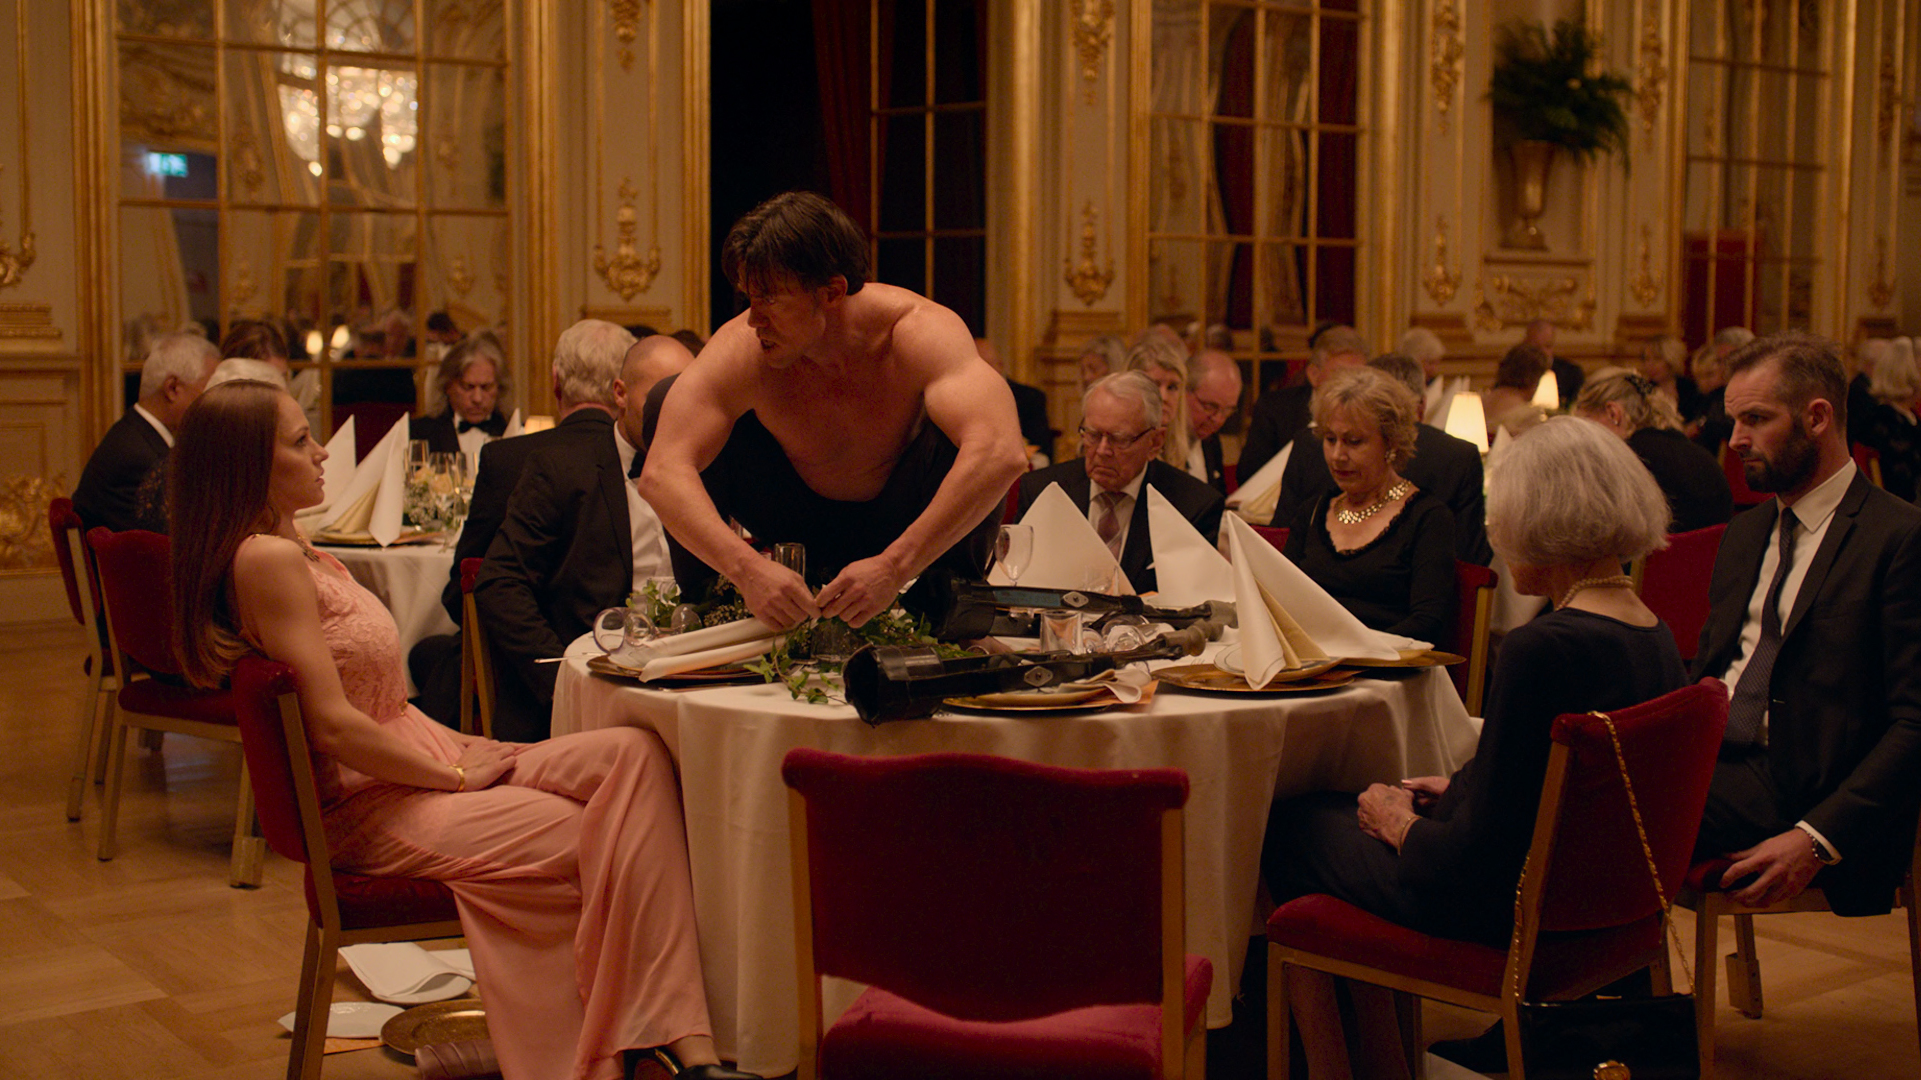 A performance artist (Terry Notary) practices his craft at a black-tie event in the arts-world satire The Square.